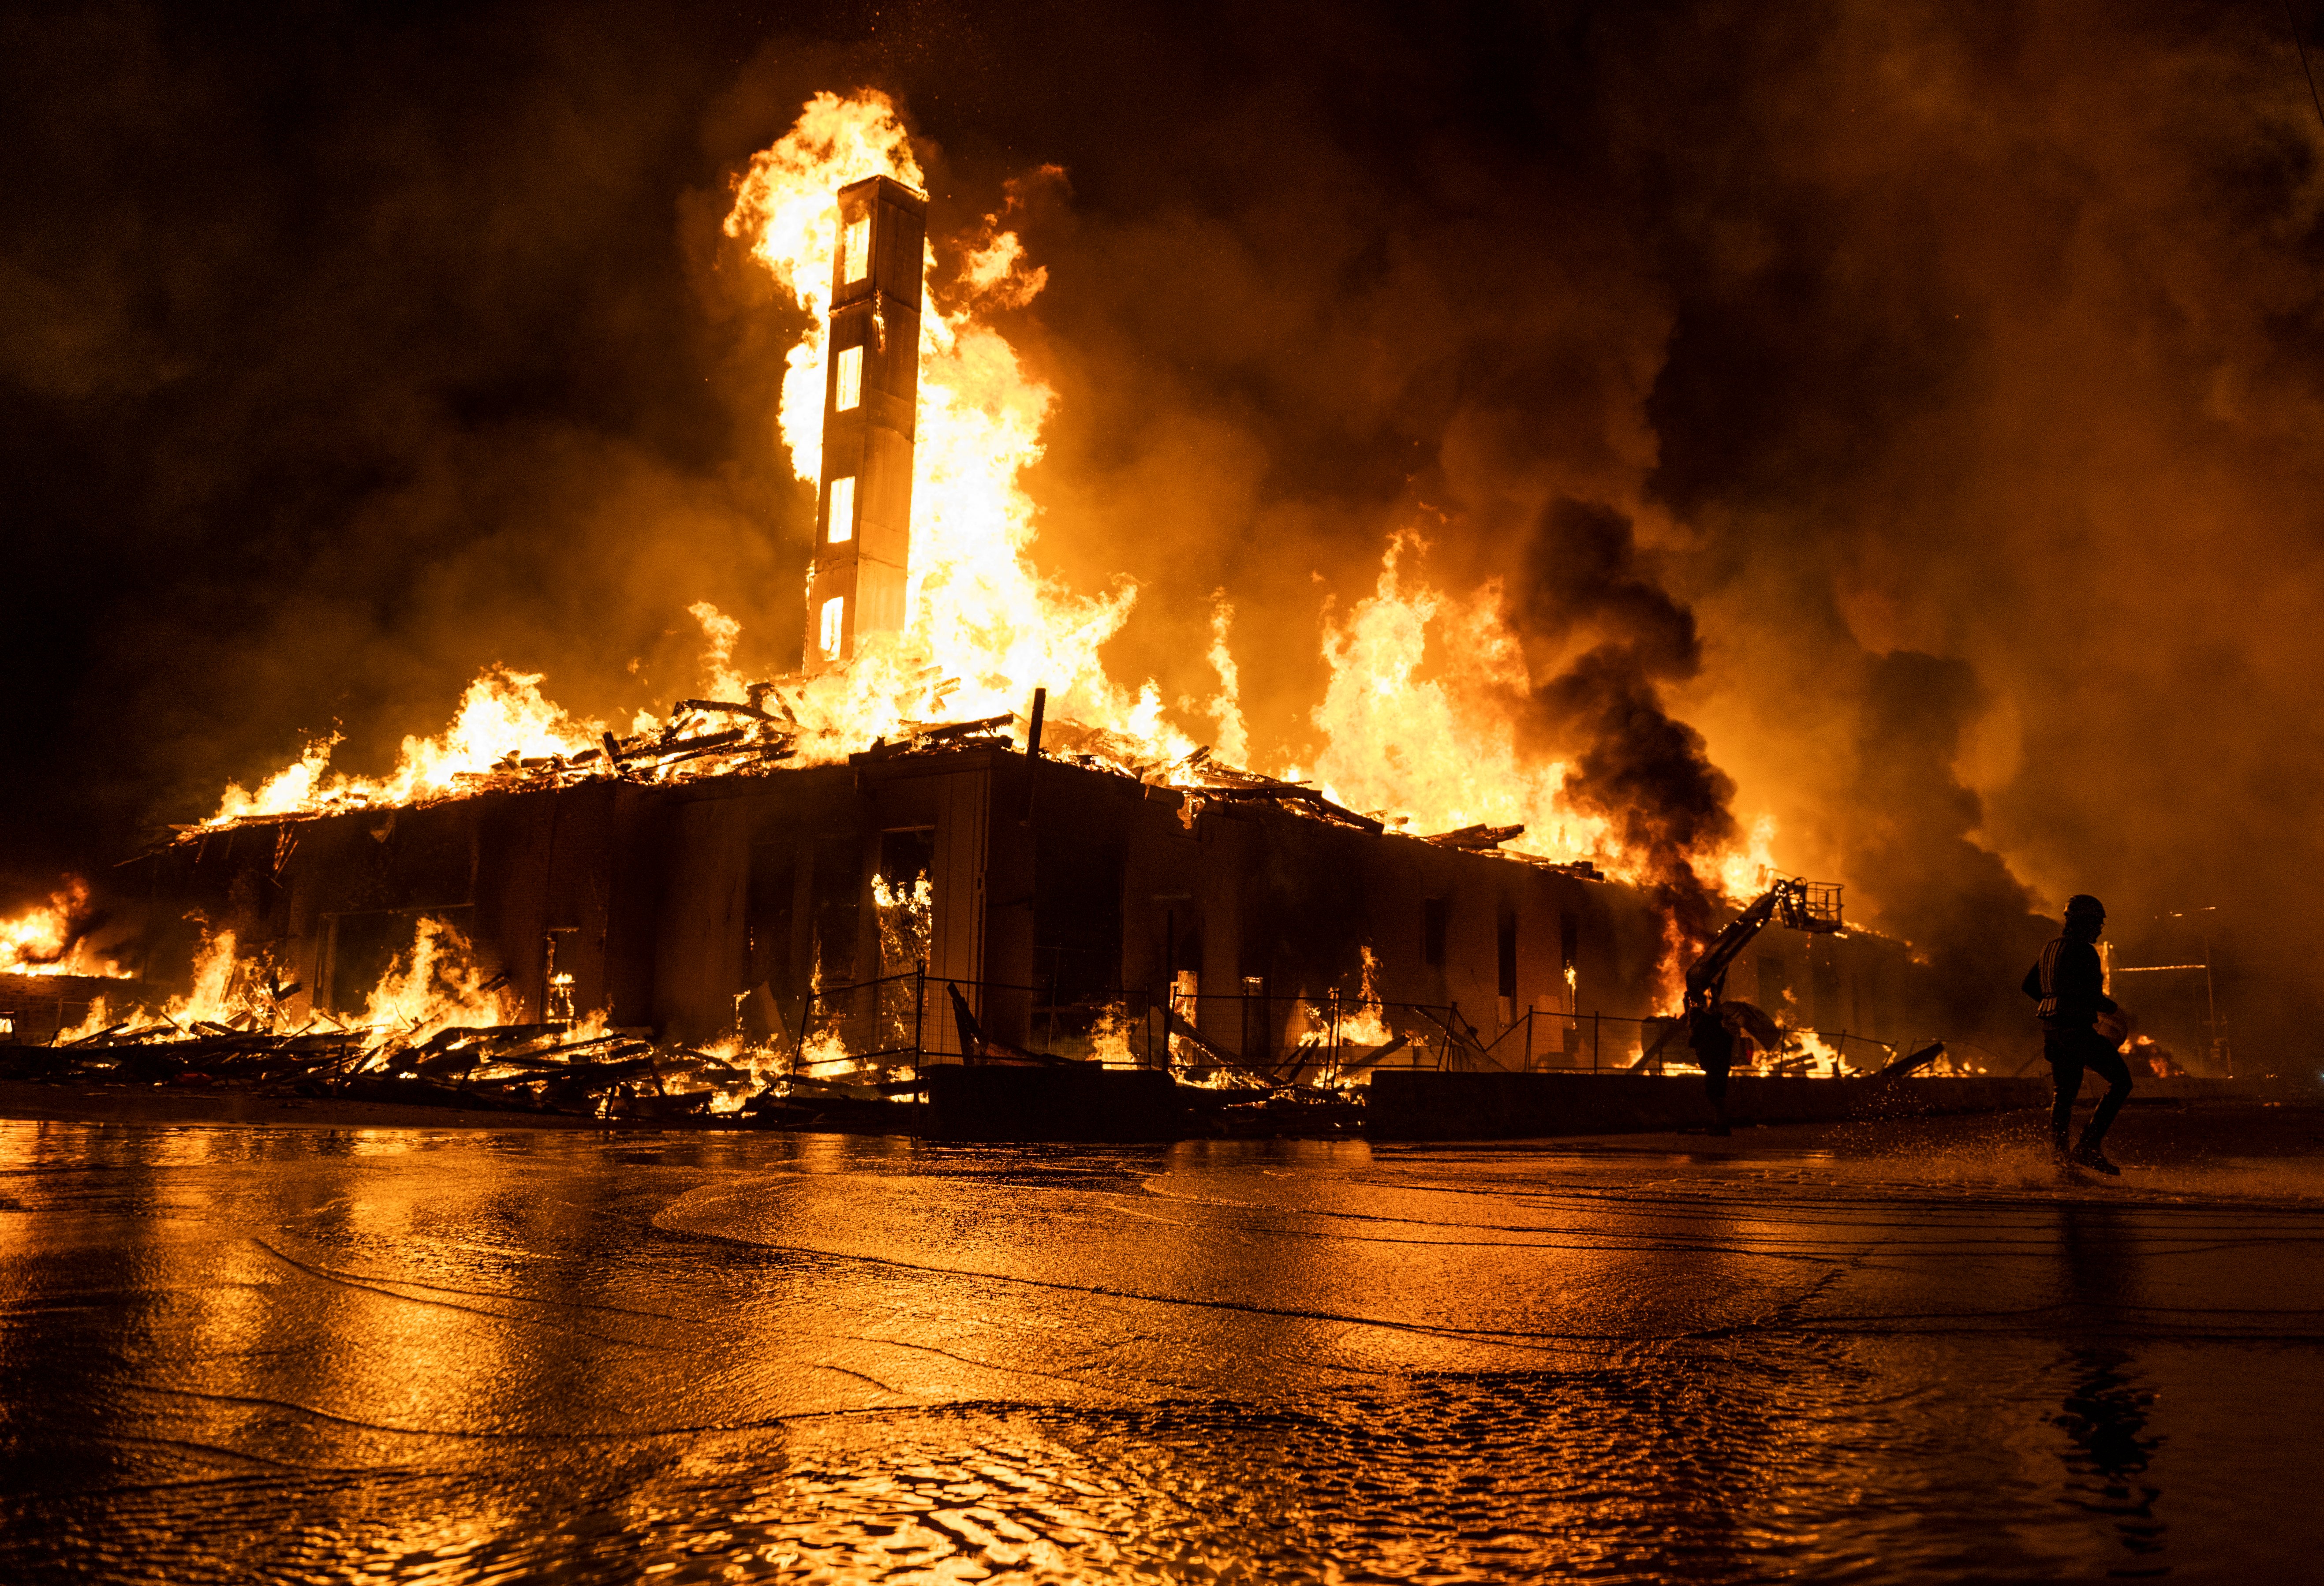 A construction site burns in a large fire near the Third Police Precinct on May 27, 2020 in Minneapolis, Minnesota. (Stephen Maturen/Getty Images)